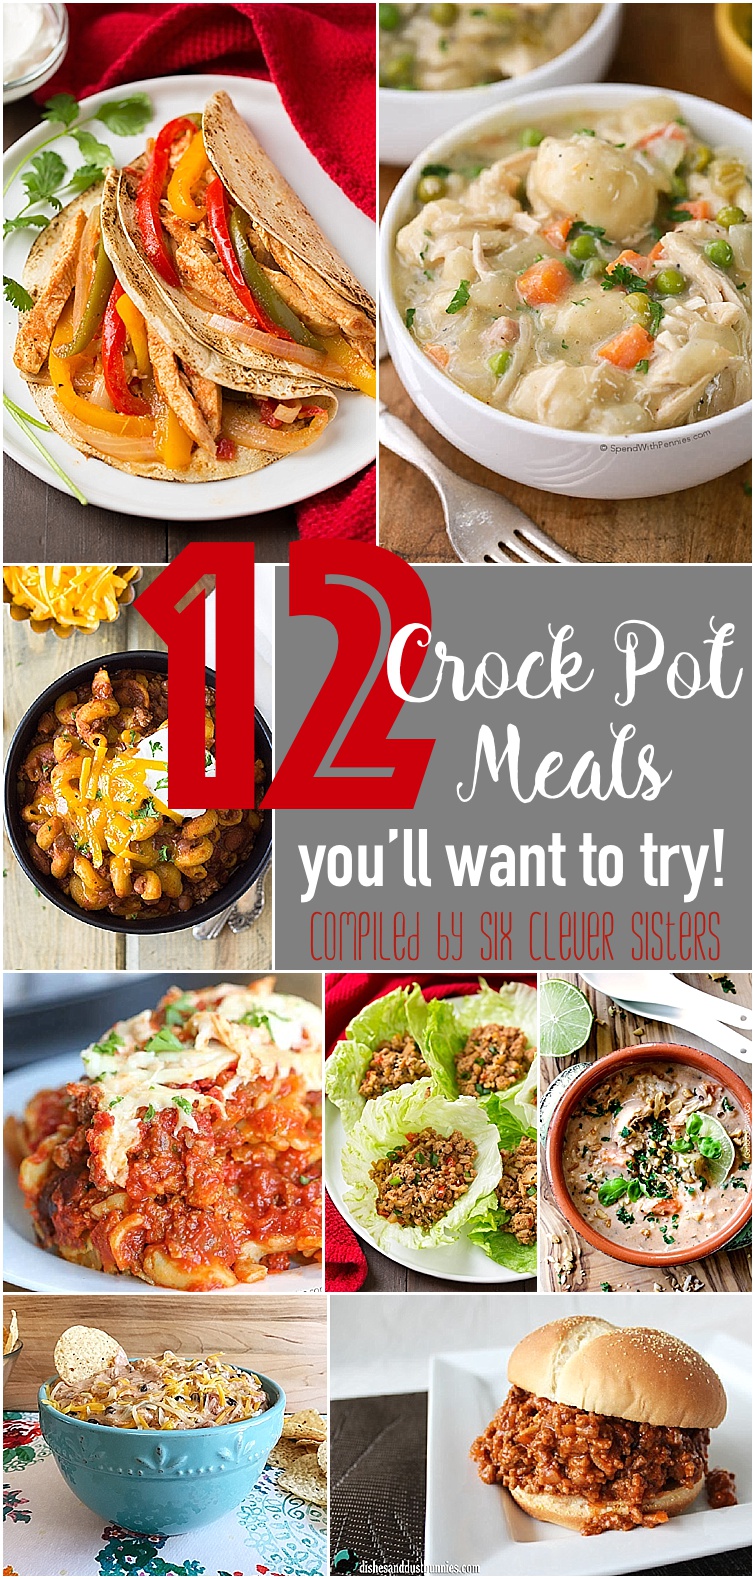 12 Crock Pot Meals you'll want to try! - Six Clever Sisters